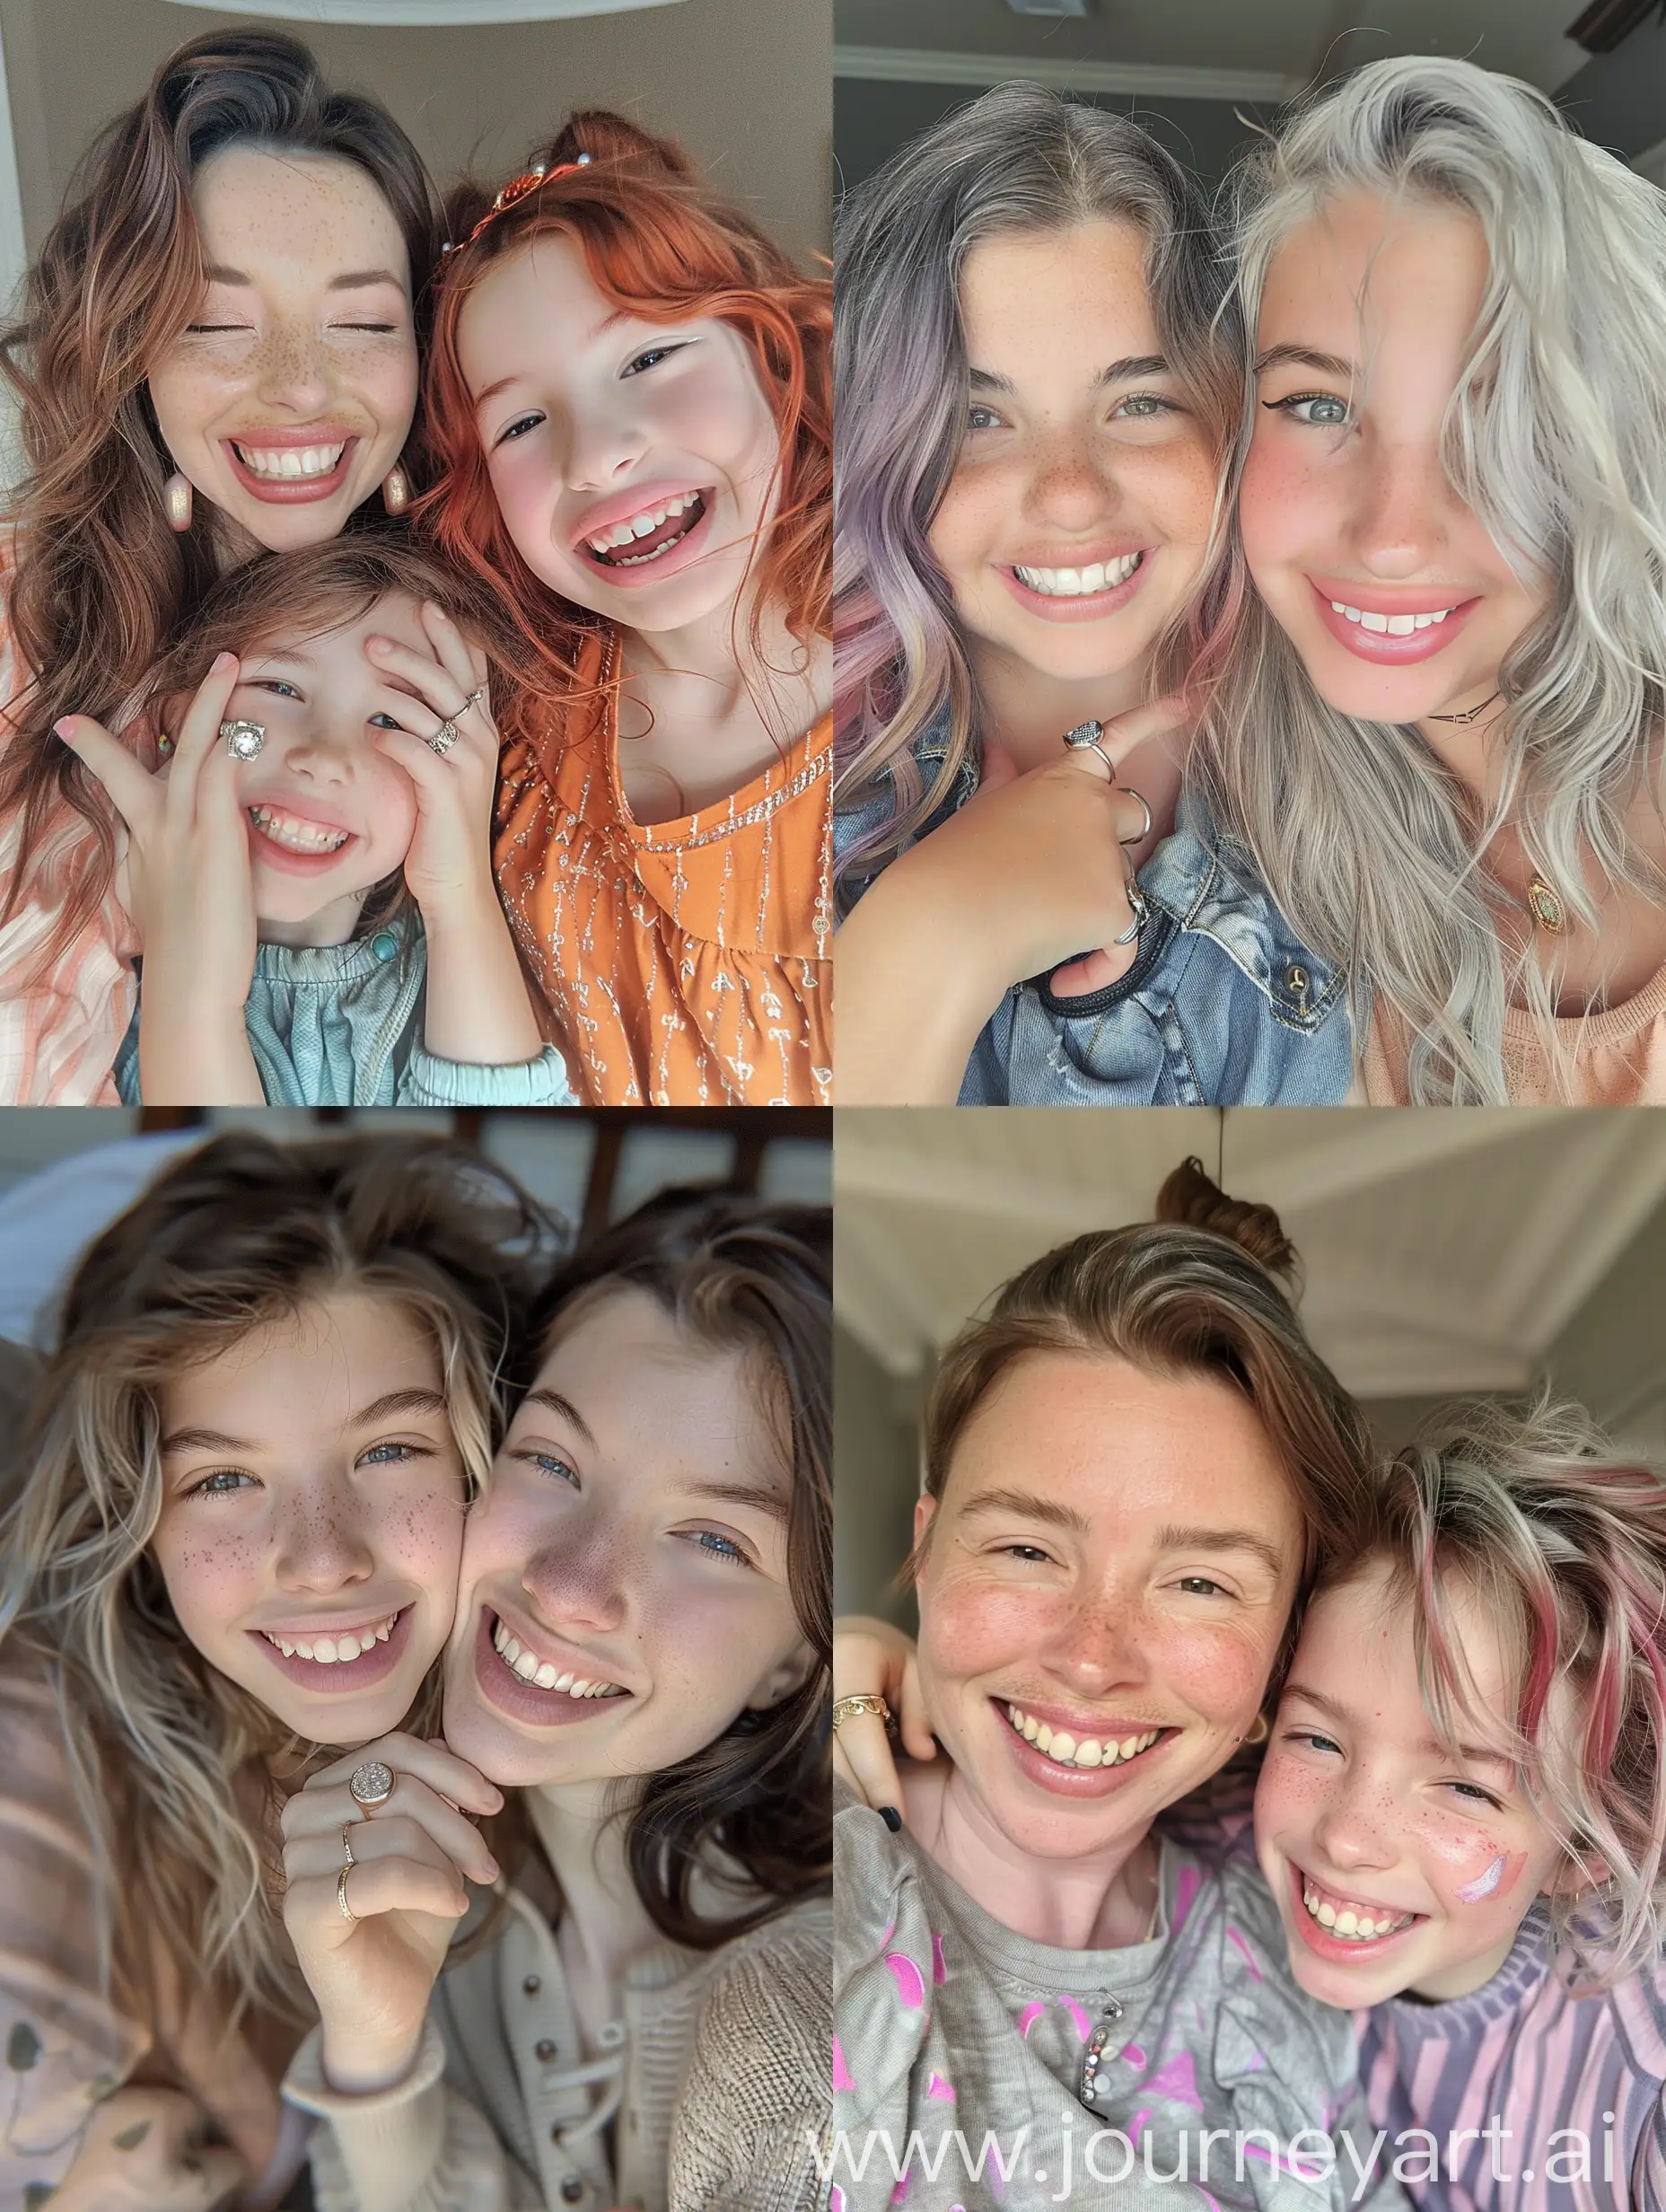 Aesthetic Instagram selfie of a 40 year old mother and her 15 year old daughter with Autism, close up selfie, cute moment together, smiling brightly, adorable, full hair, different hairstyles for each girl, rings 